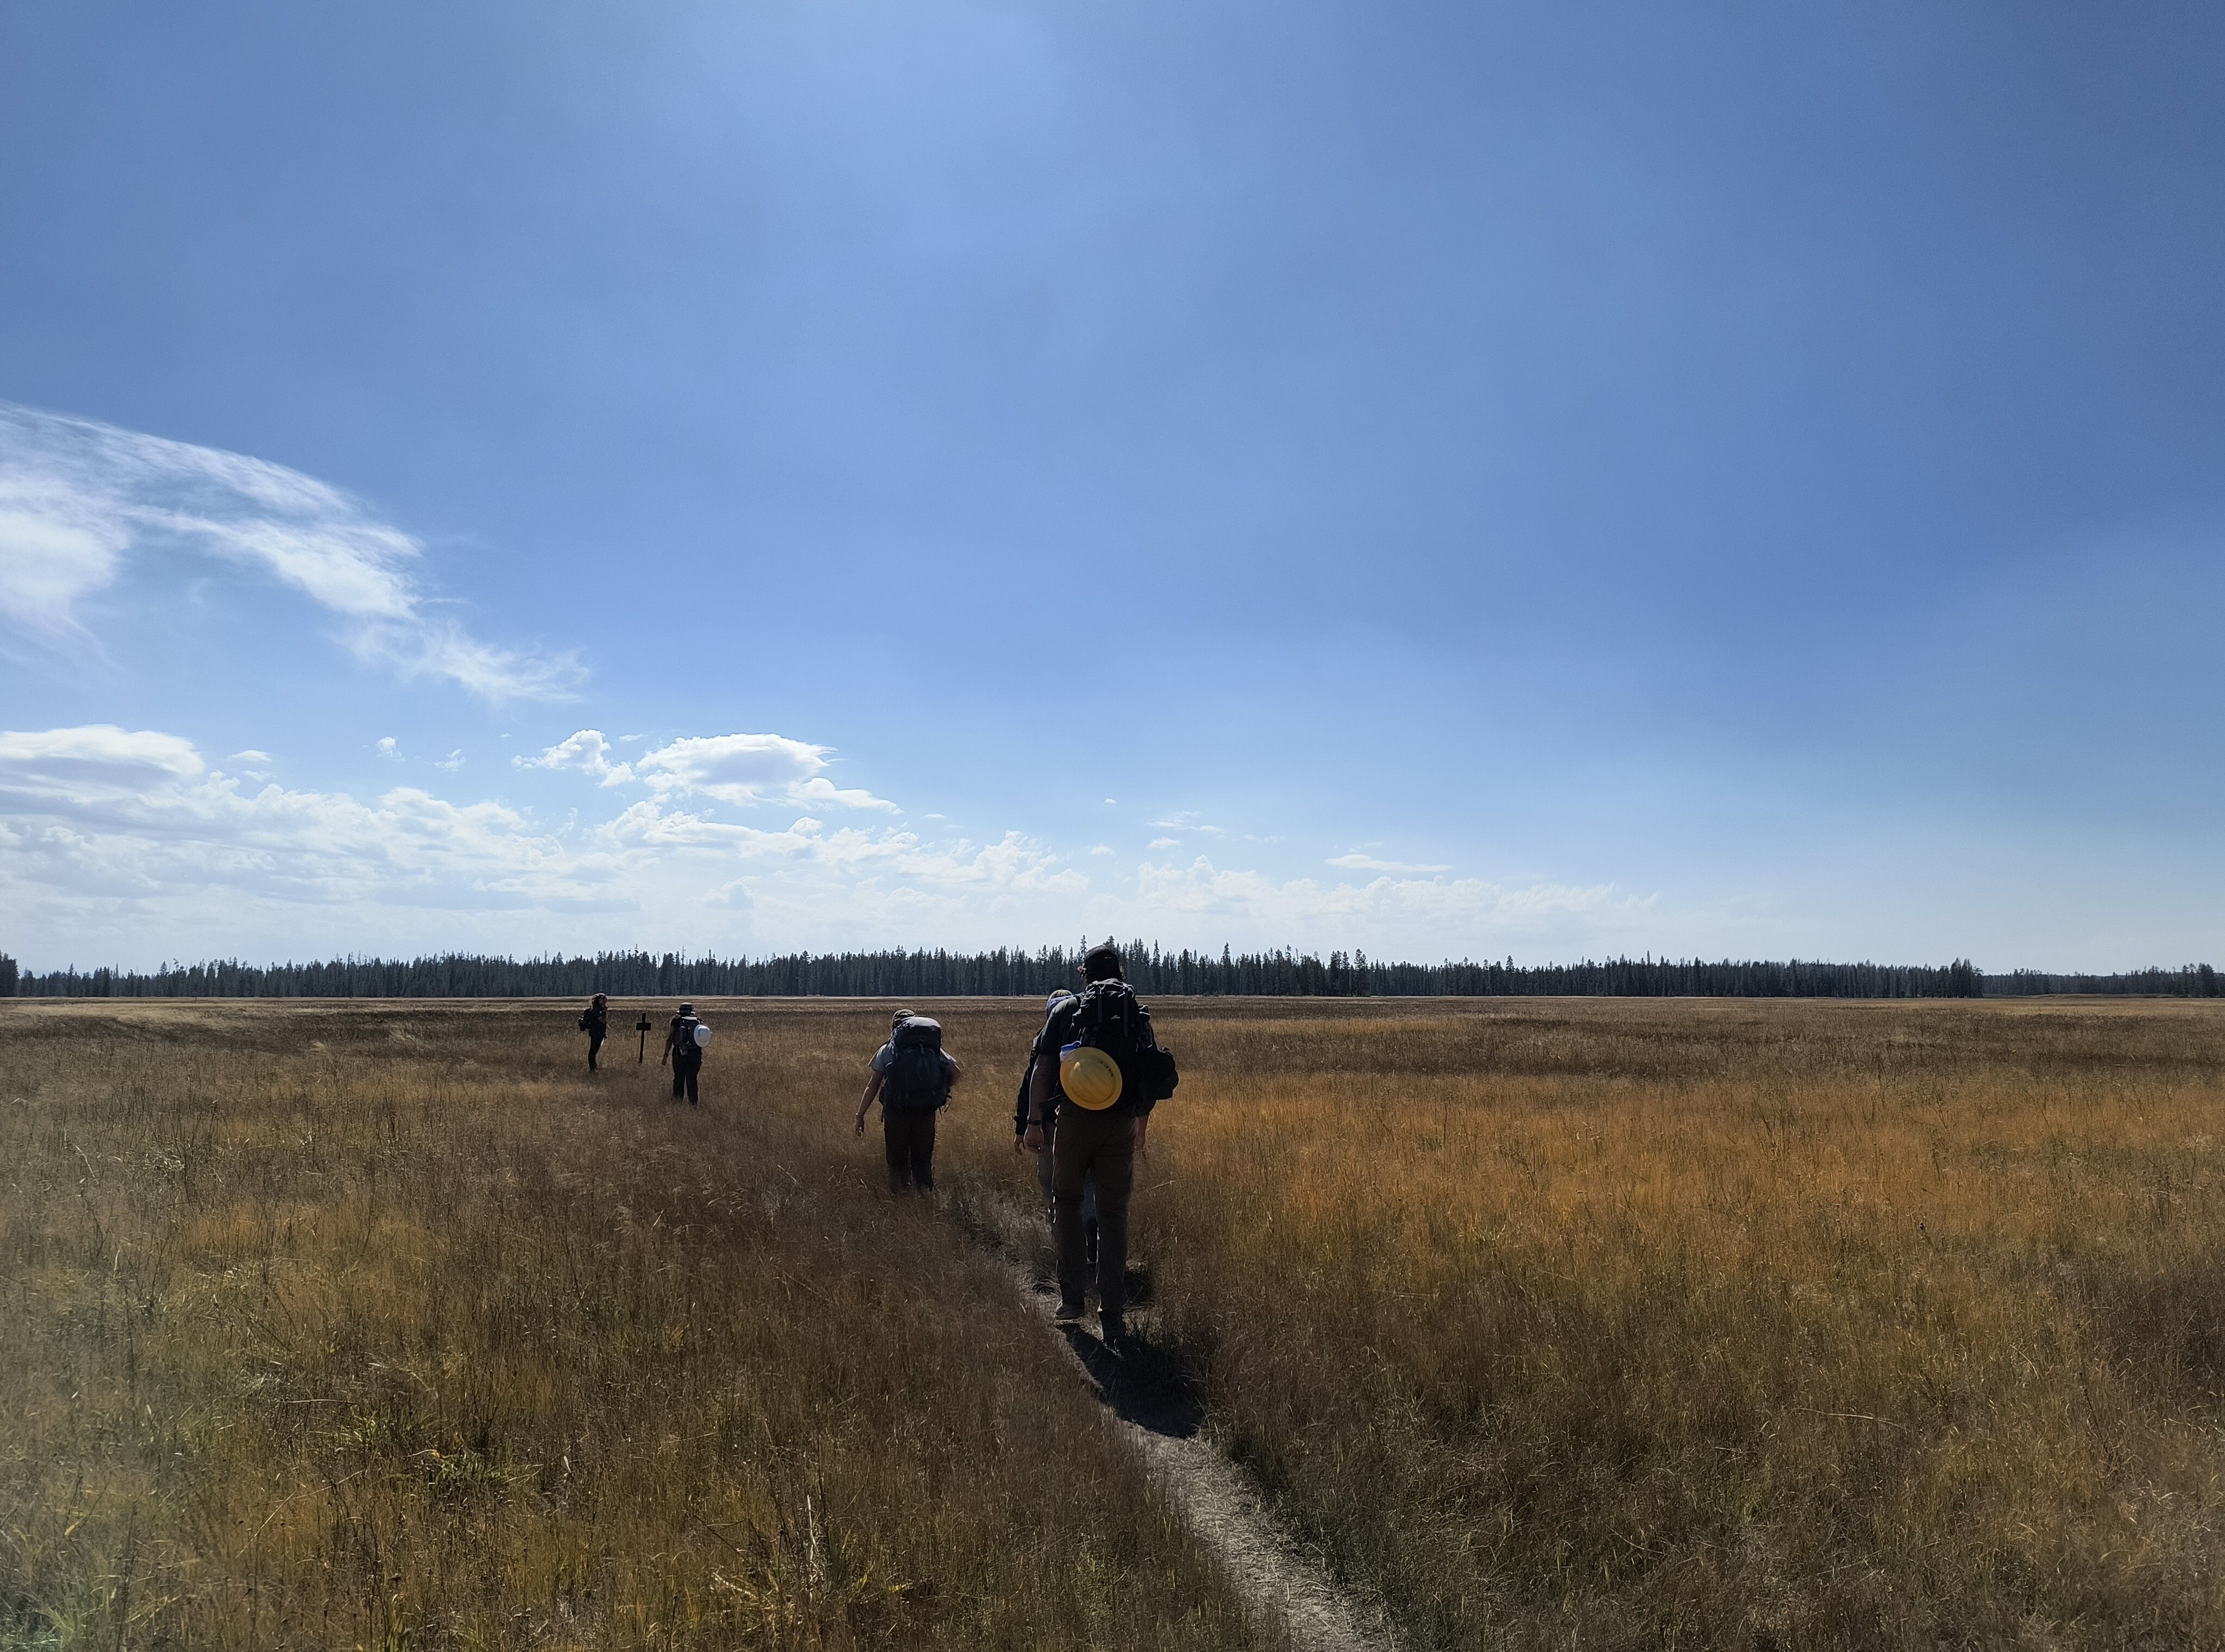 Crew members walking down a trail in the middle of a grassy field